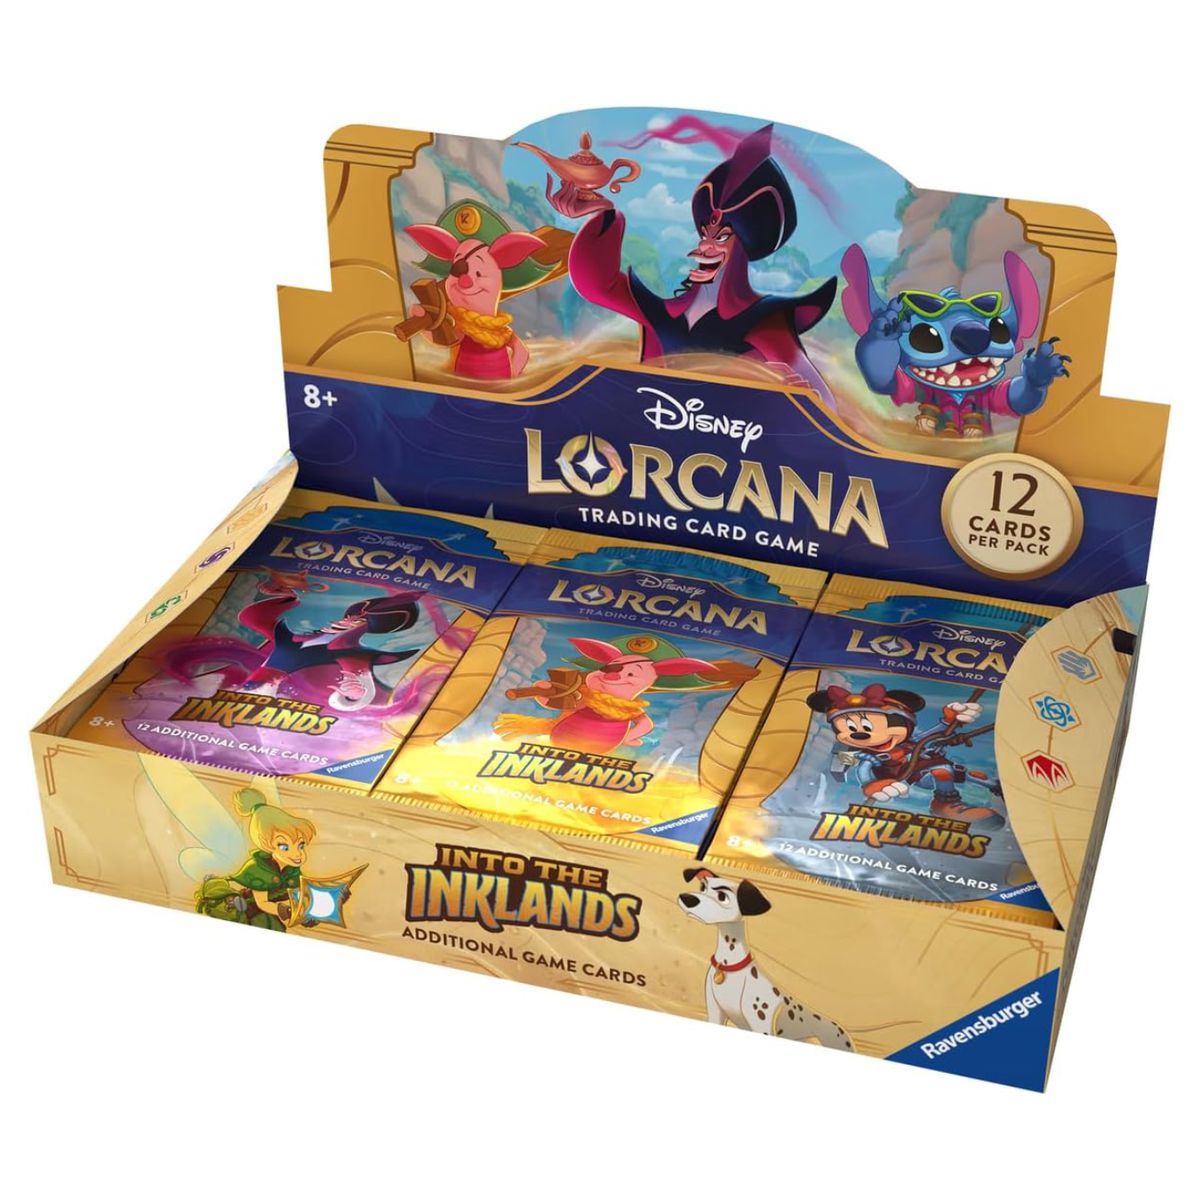 Disney Lorcana starter decks are discounted to their lowest price ever